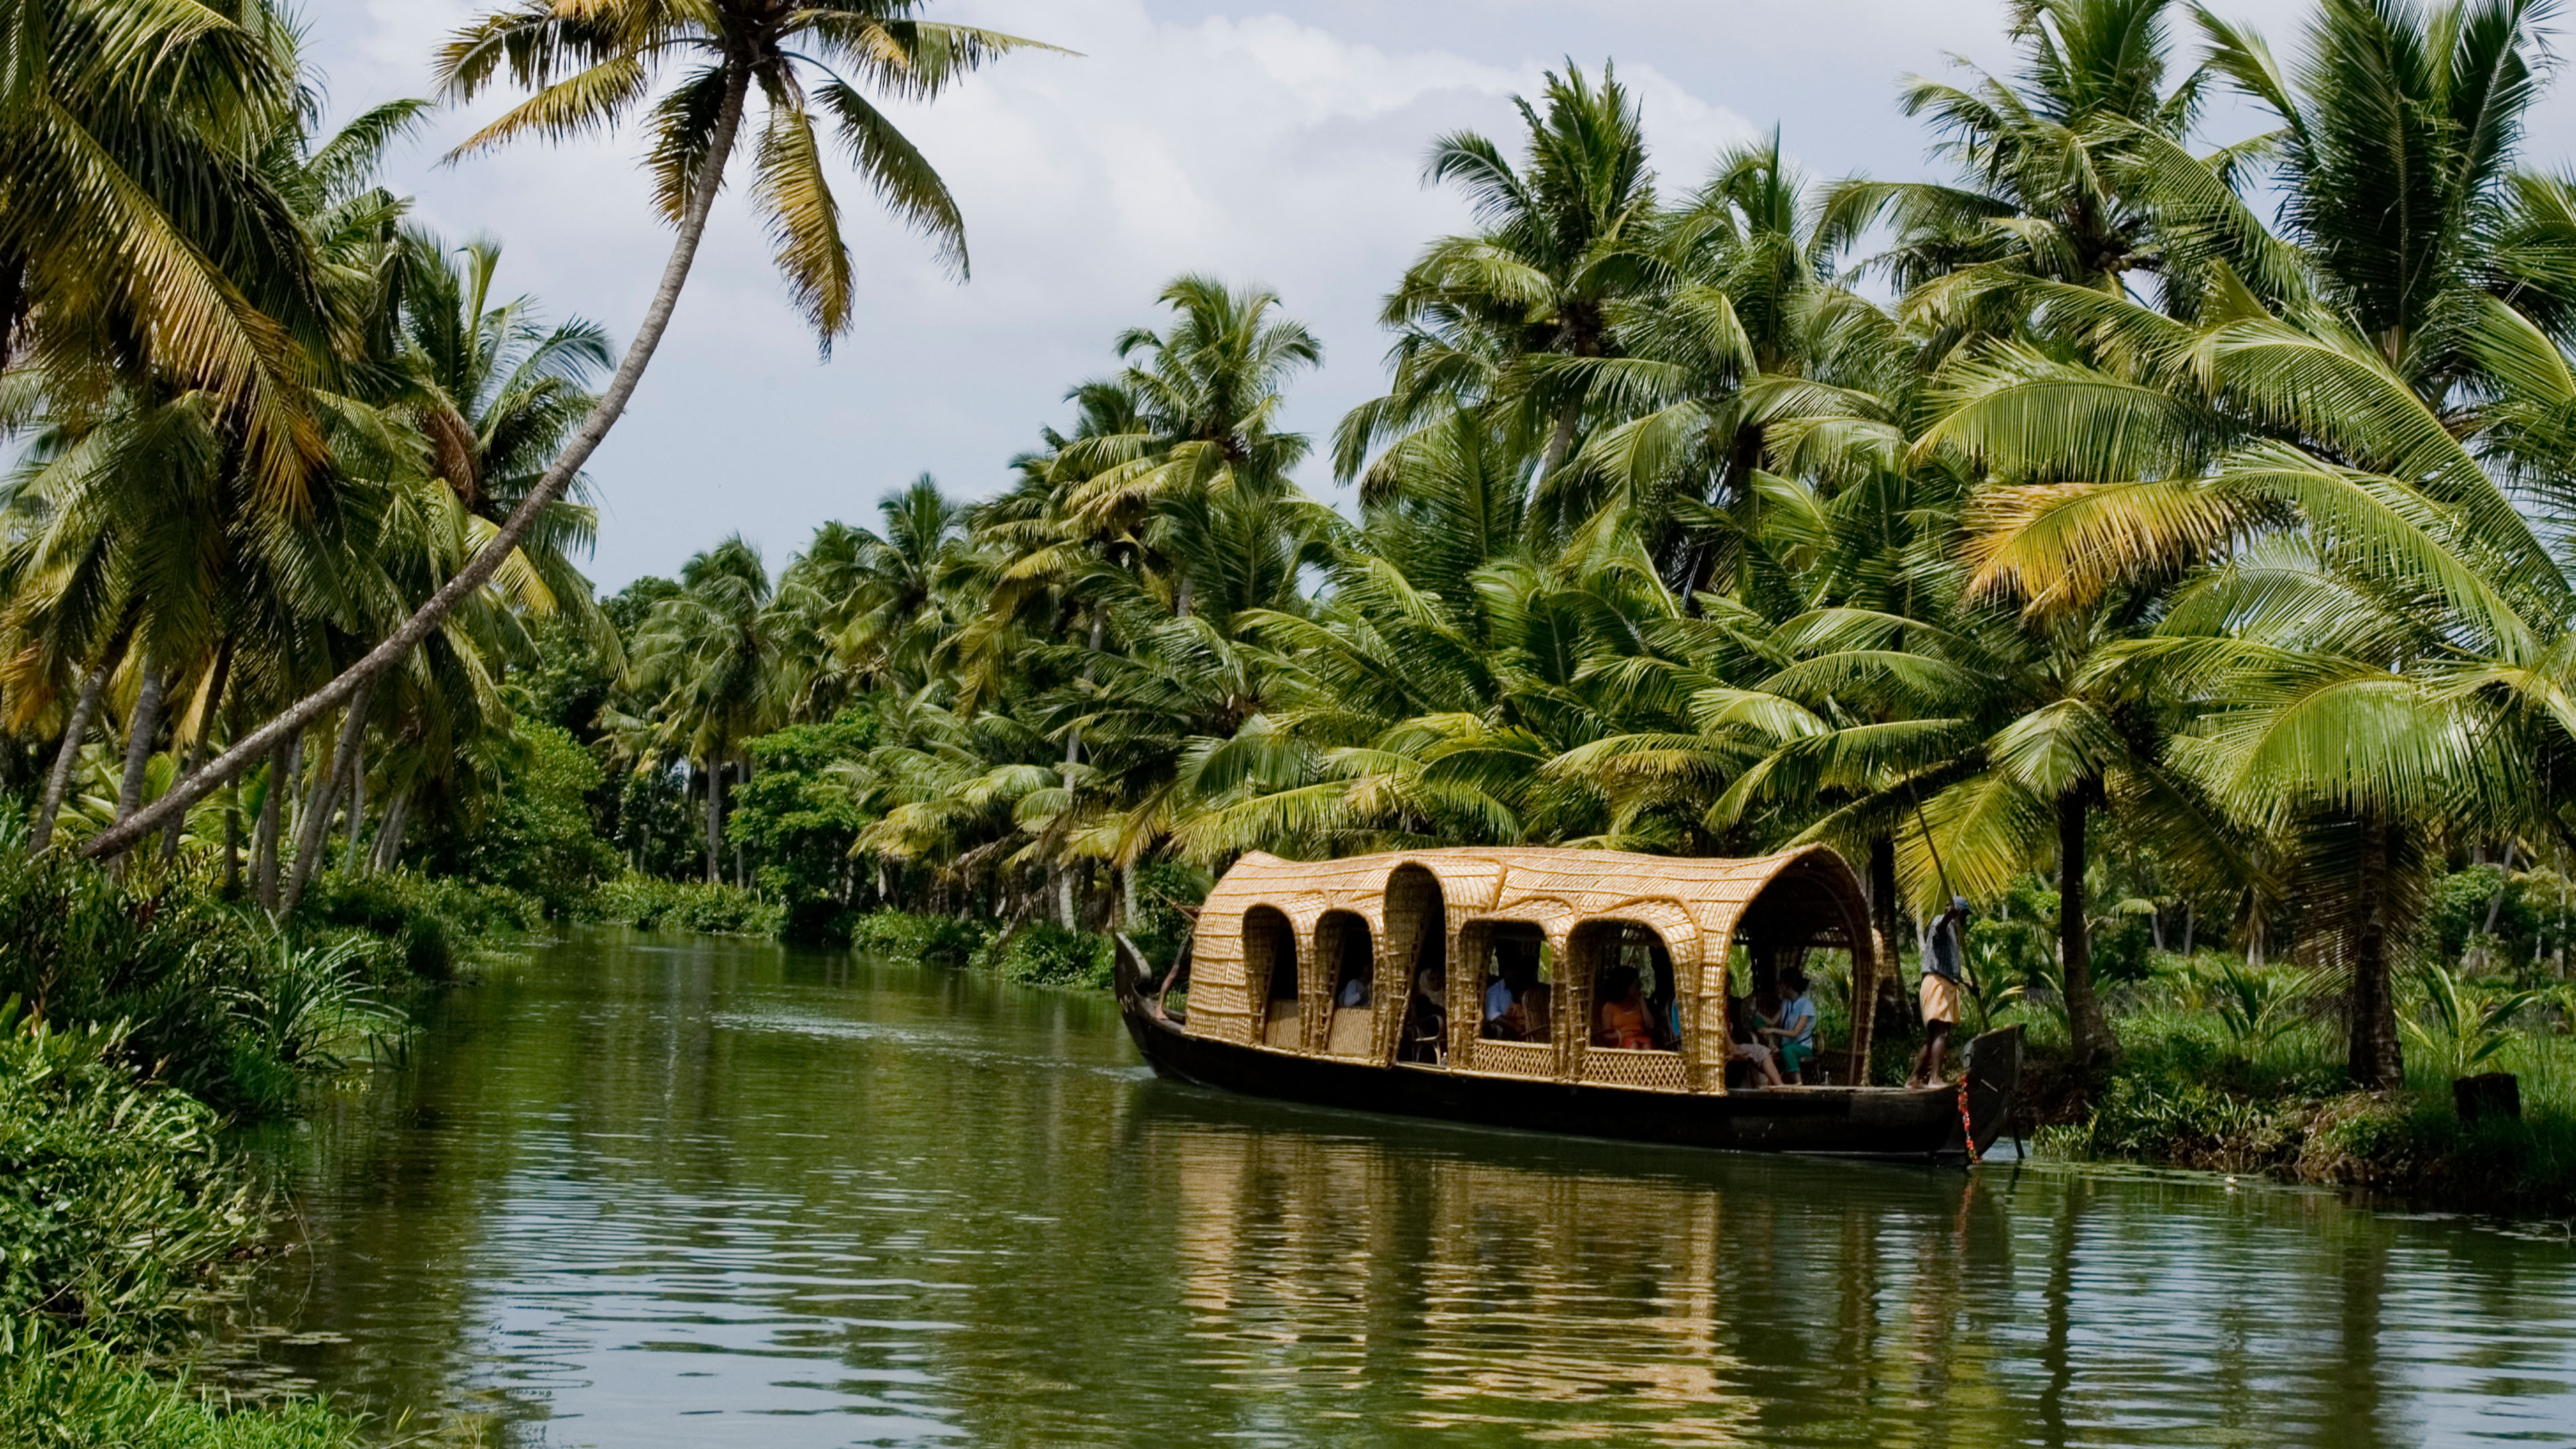 10 Best Nature Images HD in India with Kerala Backwaters - HD